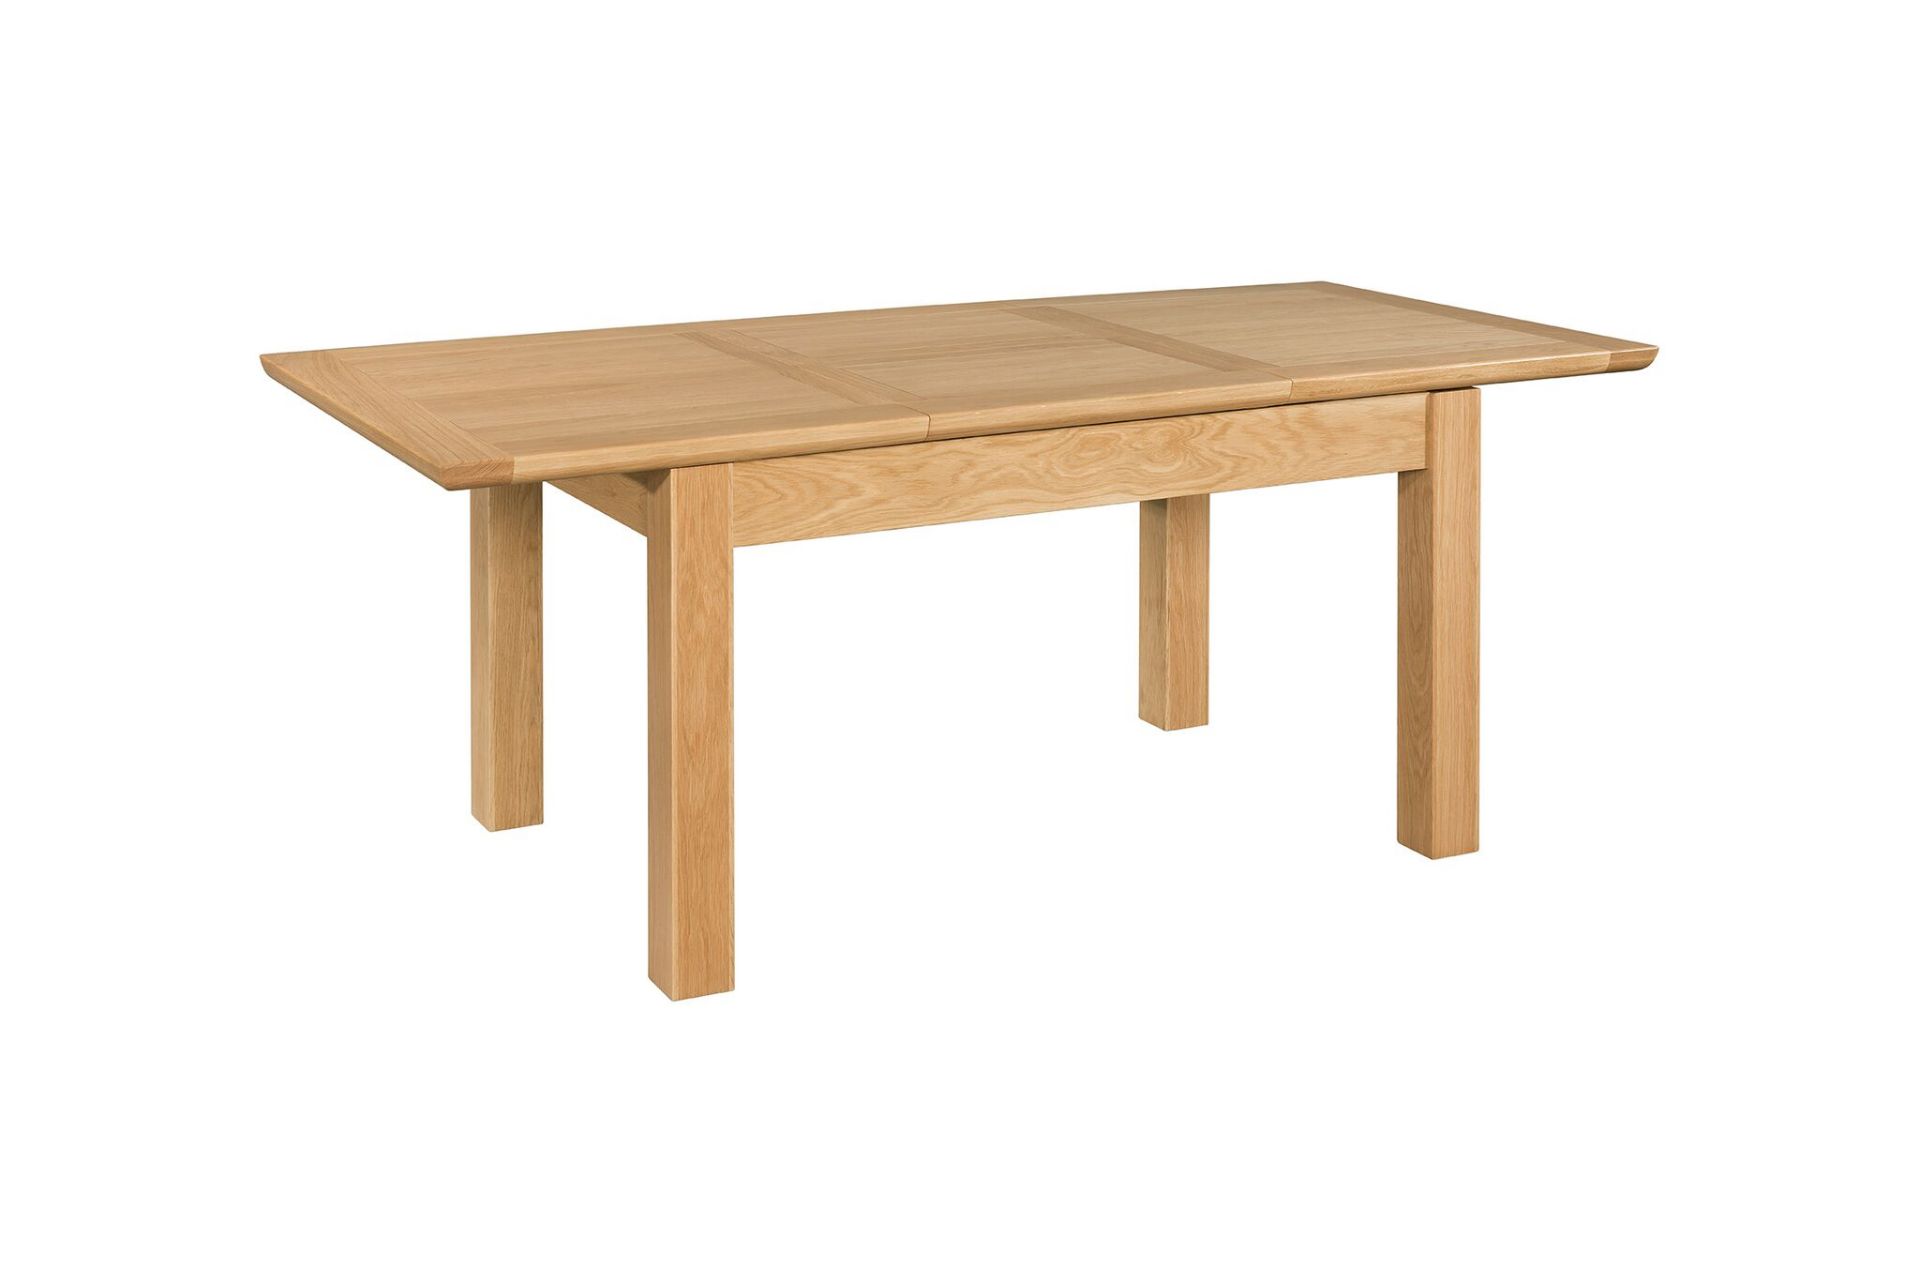 V *TRADE QTY* Brand New Siena 120x80 Butterfly Extension Table (extends to 160 cm) RRP419 ( - Image 2 of 2